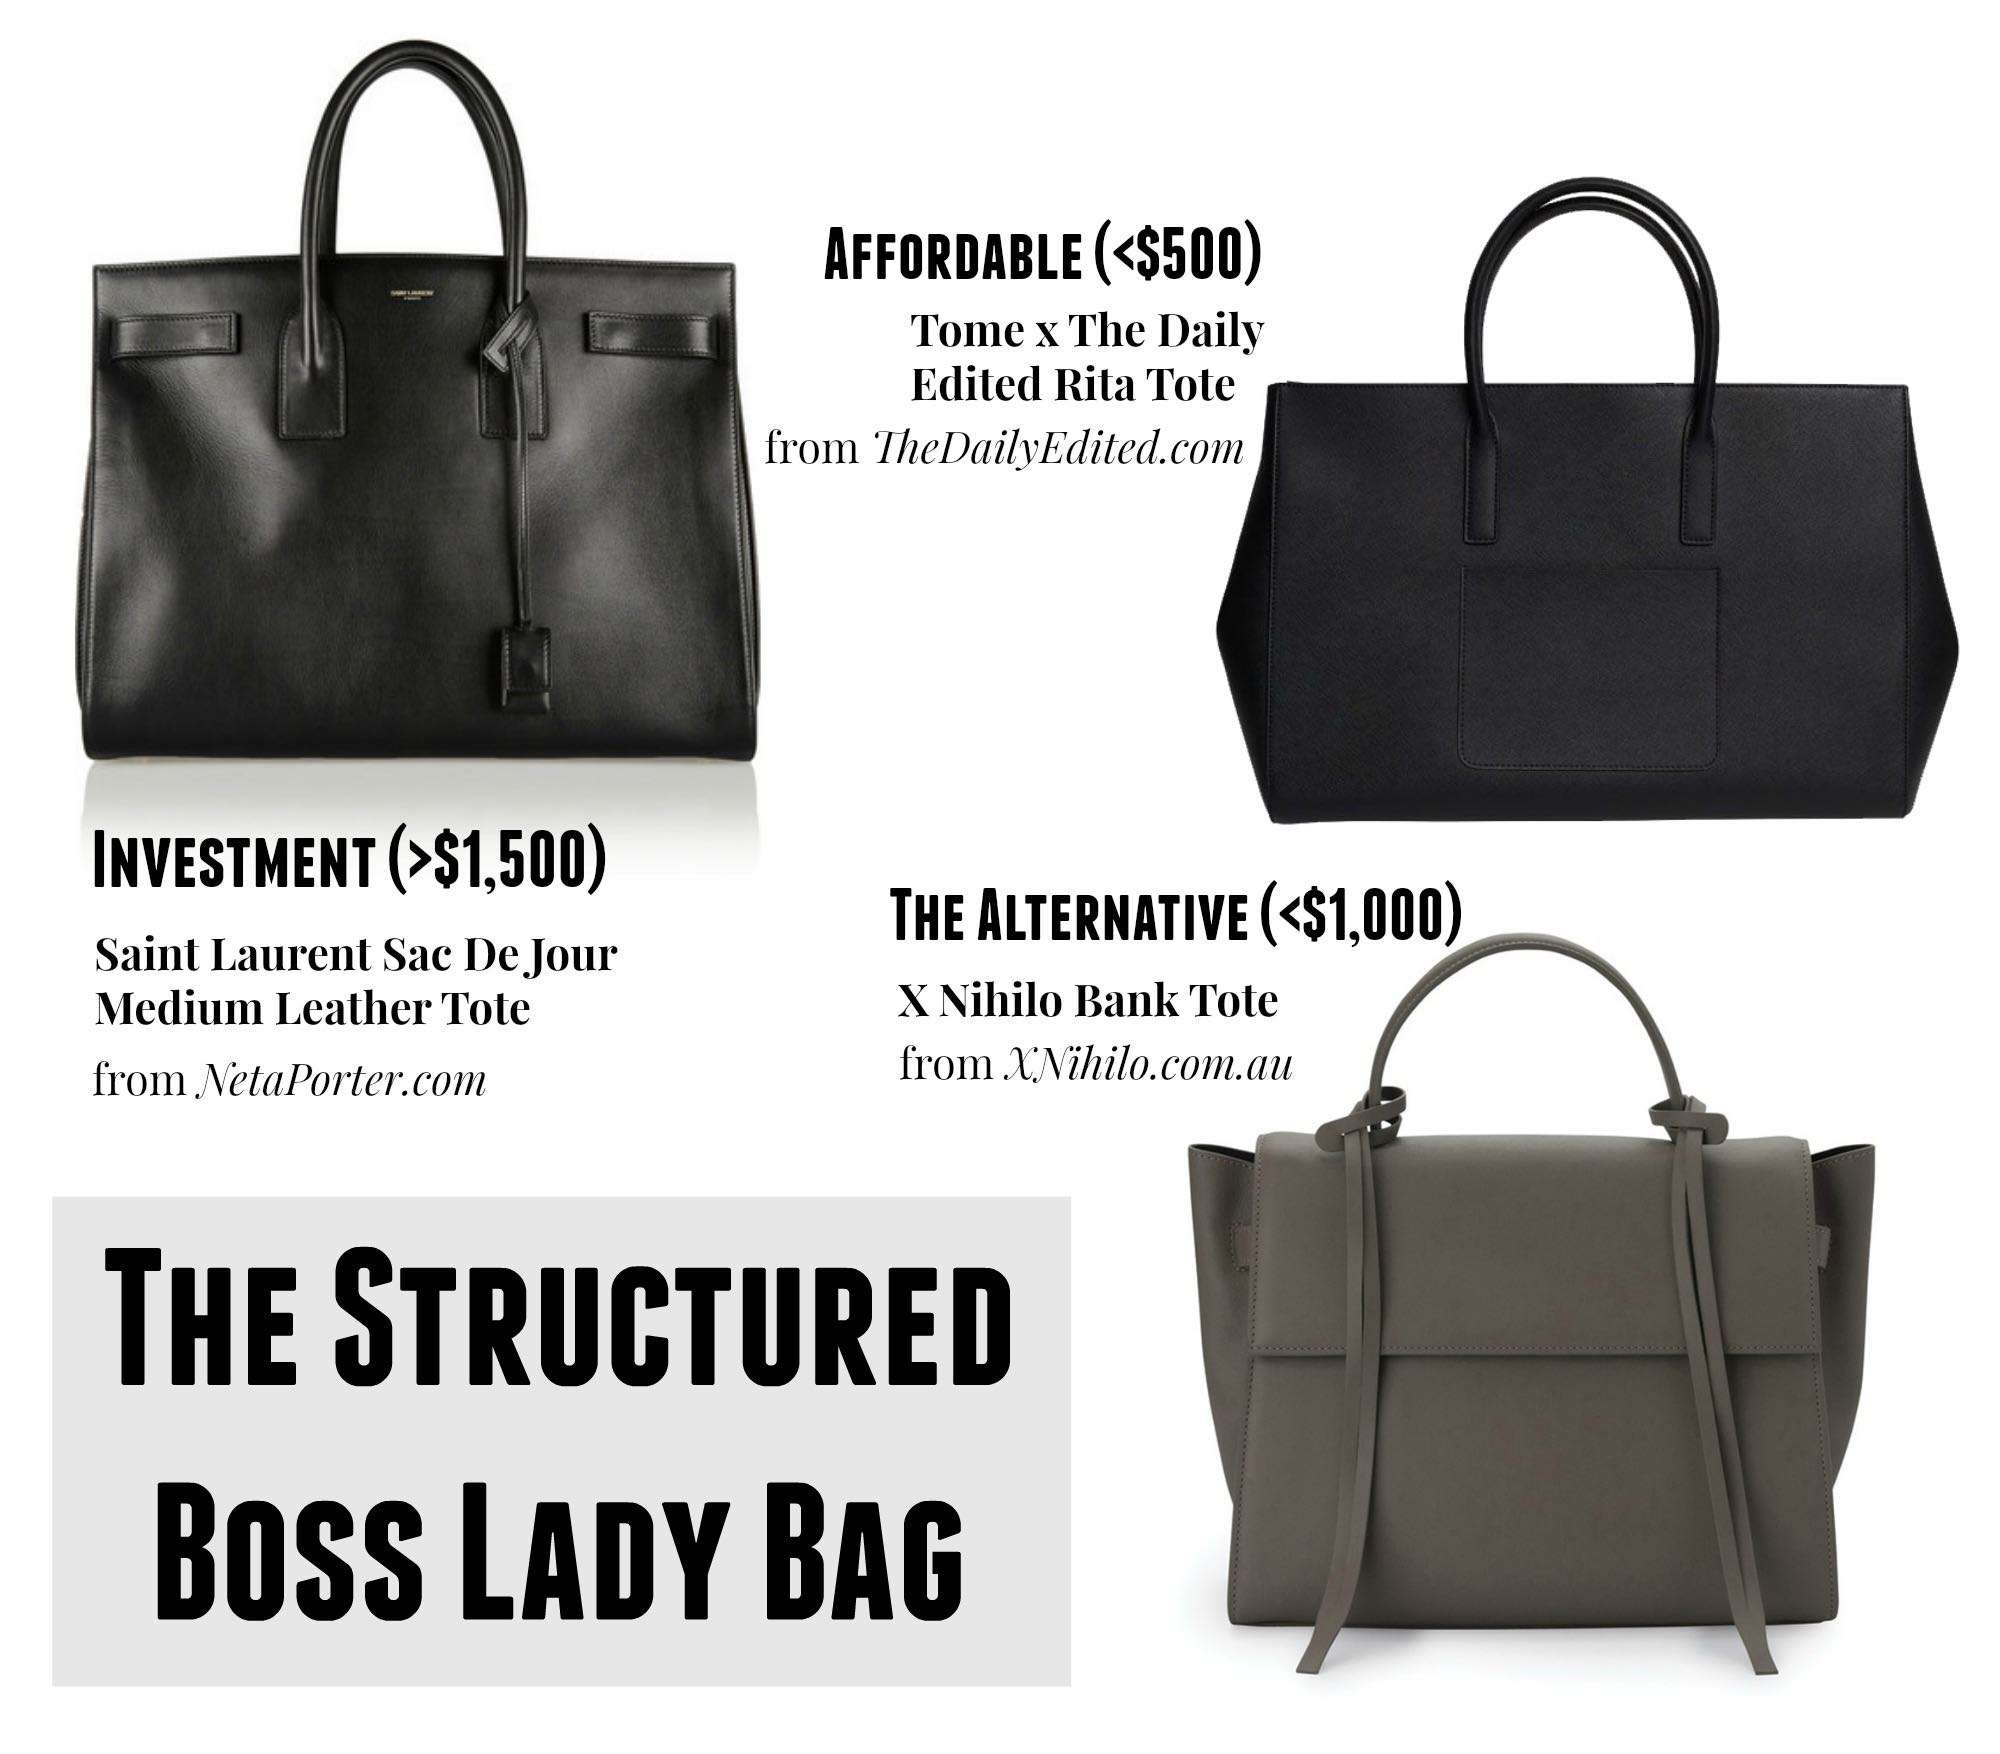 The Structured Boss Lady Bag